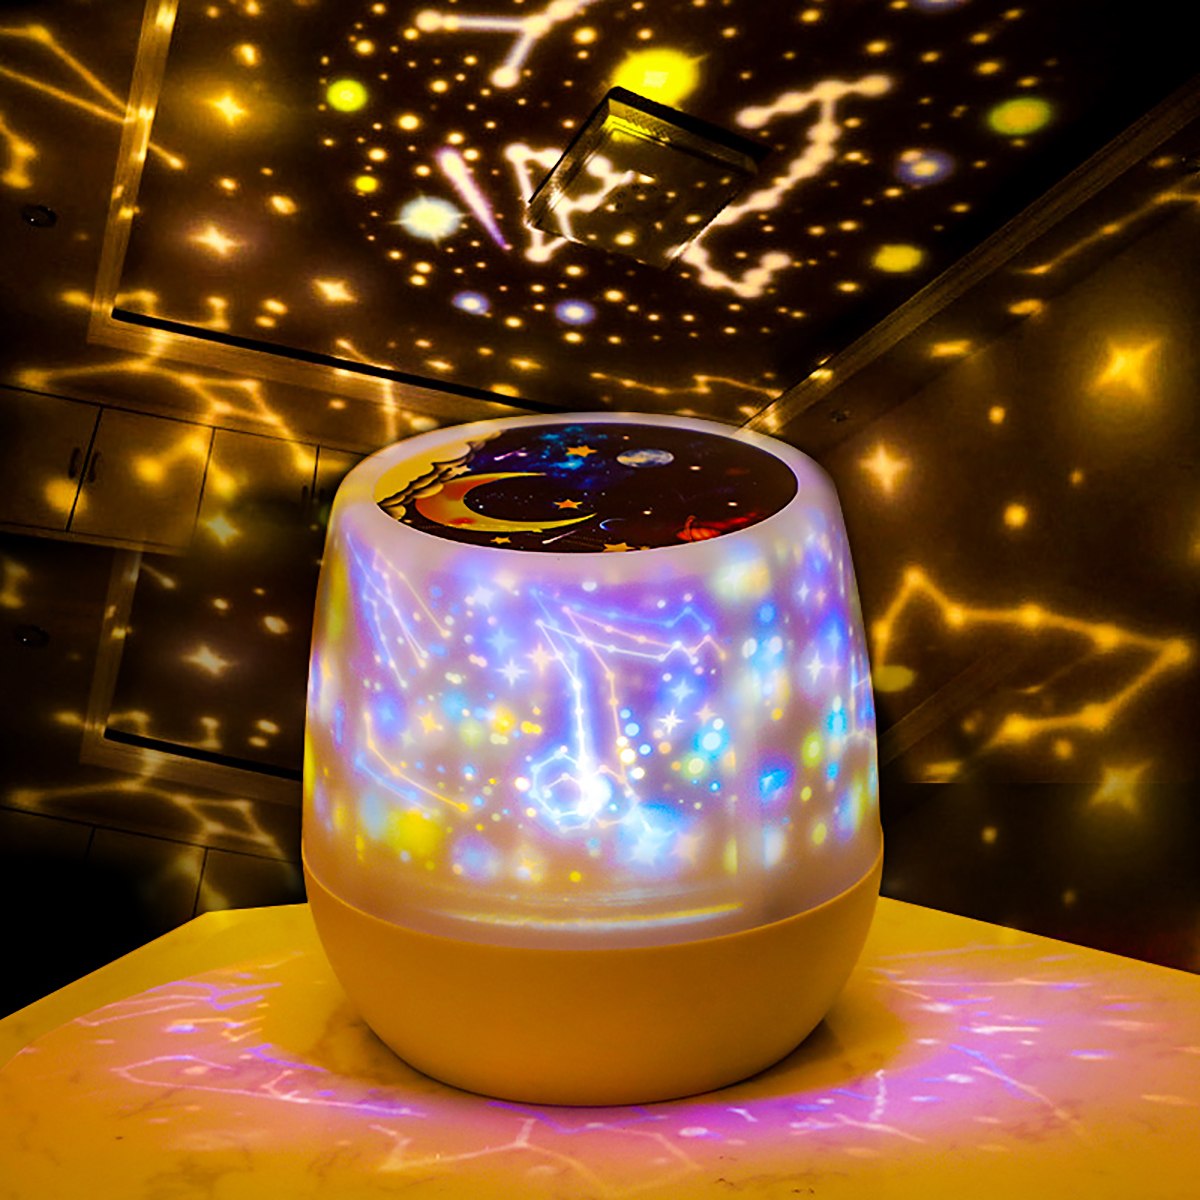 Romantic-Starry-Night-Sky-Projector-Lamp-Cosmos-Star-LED-Light-Universe-Kid-Gift-1795916-7